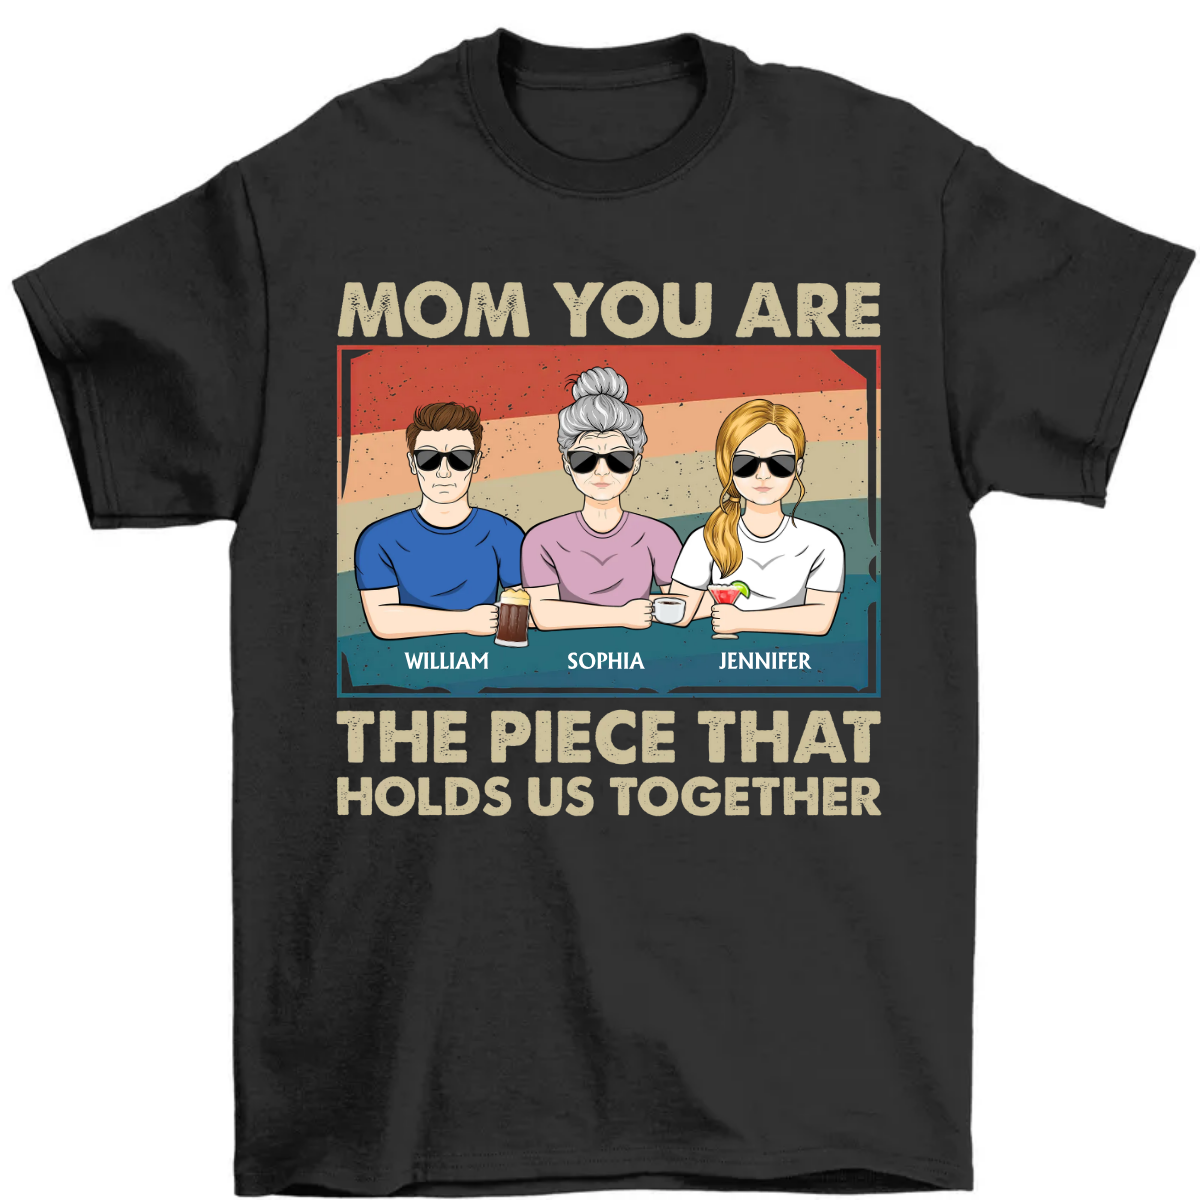 Mom You Are The Piece That Holds Us Together - Mothers Day Gift - Personalized T Shirt